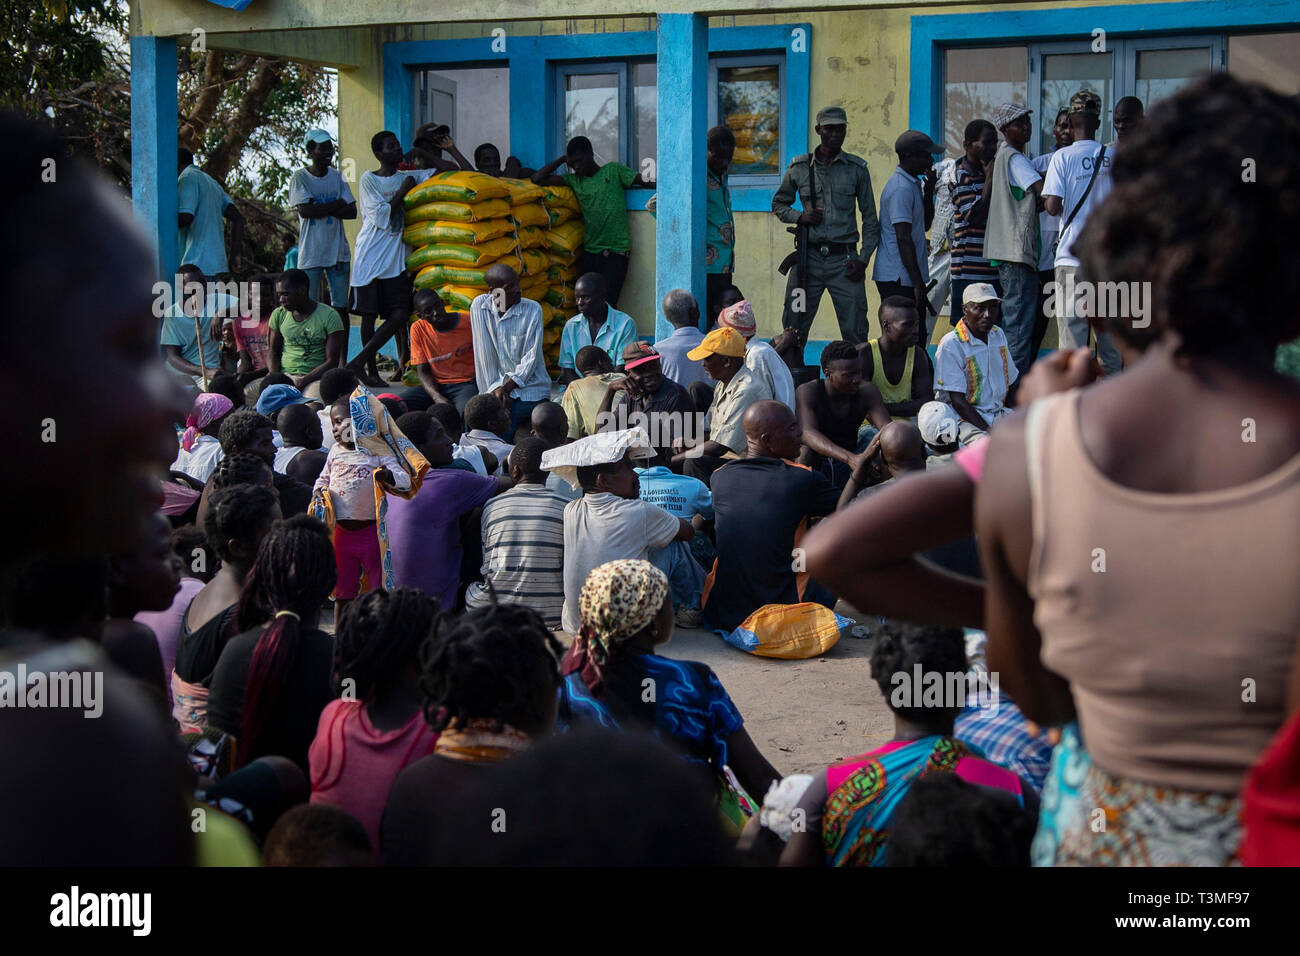 Villagers wait for food aid to be distributed in the aftermath of the massive Cyclone Idai April 6, 2019 in Nhagau, Mozambique. The World Food Programme, with help from the U.S. Air Force is transporting emergency relief supplies to assist the devastated region. Stock Photo